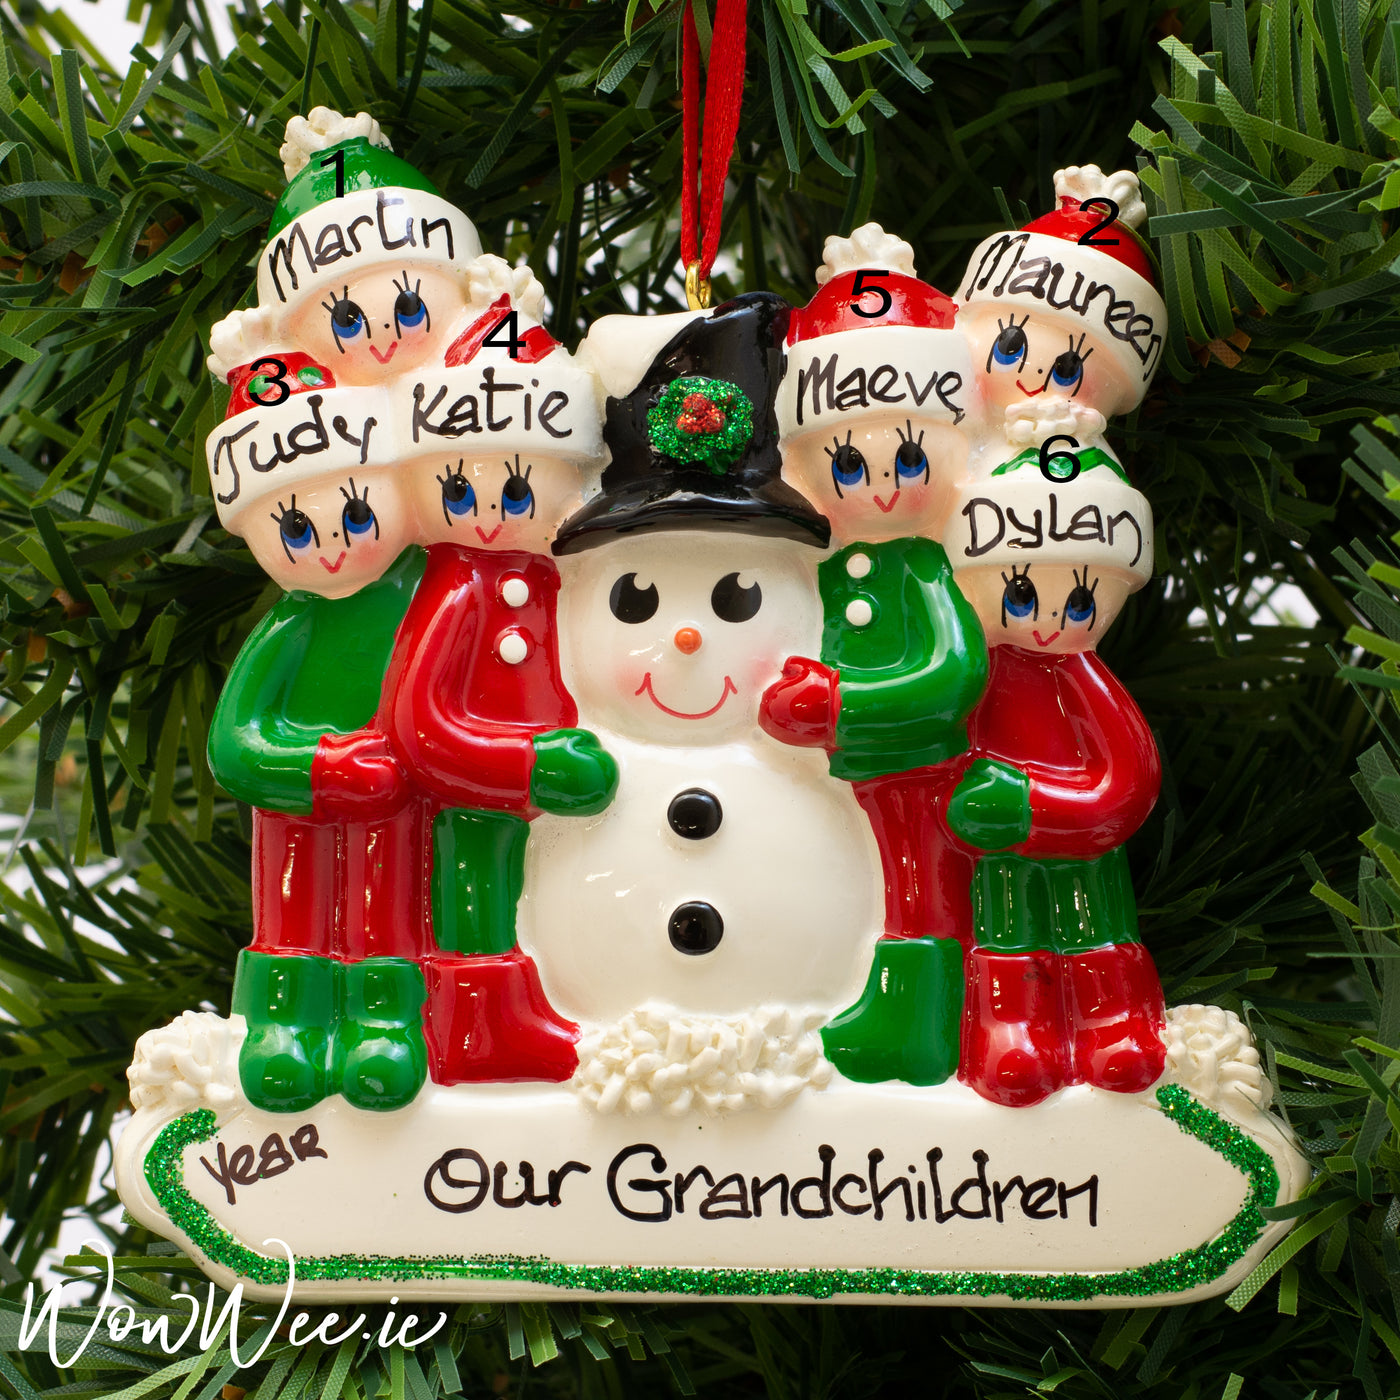 Personalised Christmas Tree Decoration - Making a Snowman Family of 6 - WowWee.ie Personalised Gifts